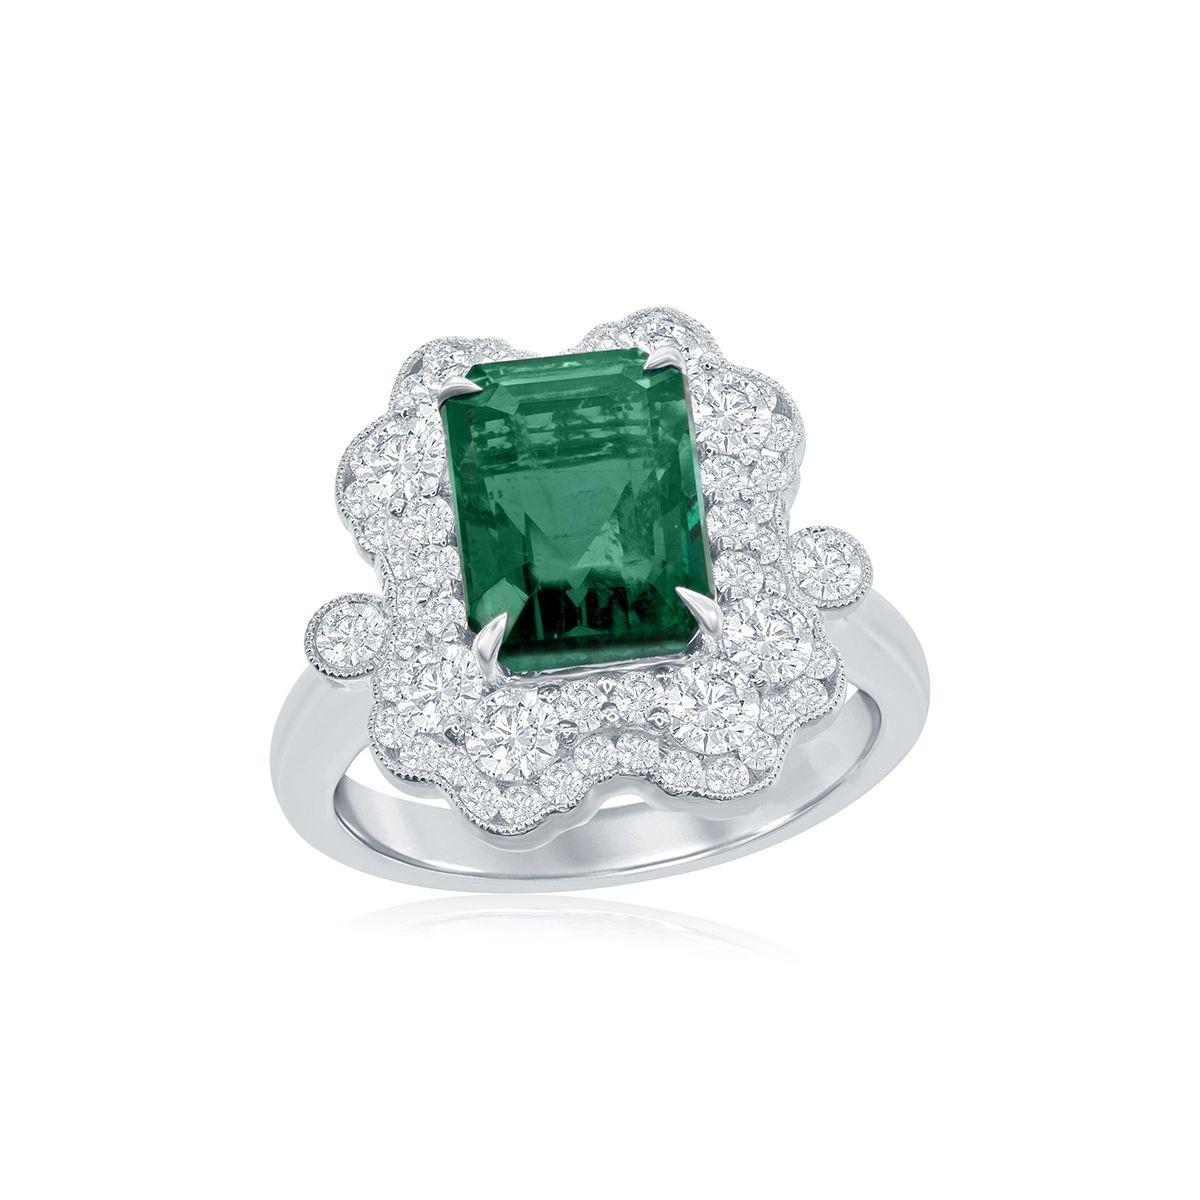 18k White Gold 3.63ct Emerald and 1.44ct Diamond Ring

A luxurious emerald sits in the center of a beautiful and elaborate
diamond setting.
Item: # 03143
Metal: 18k W
Lab: C.dunaigre
Color Weight: 3.63 ct.
Diamond Weight: 1.44 ct.